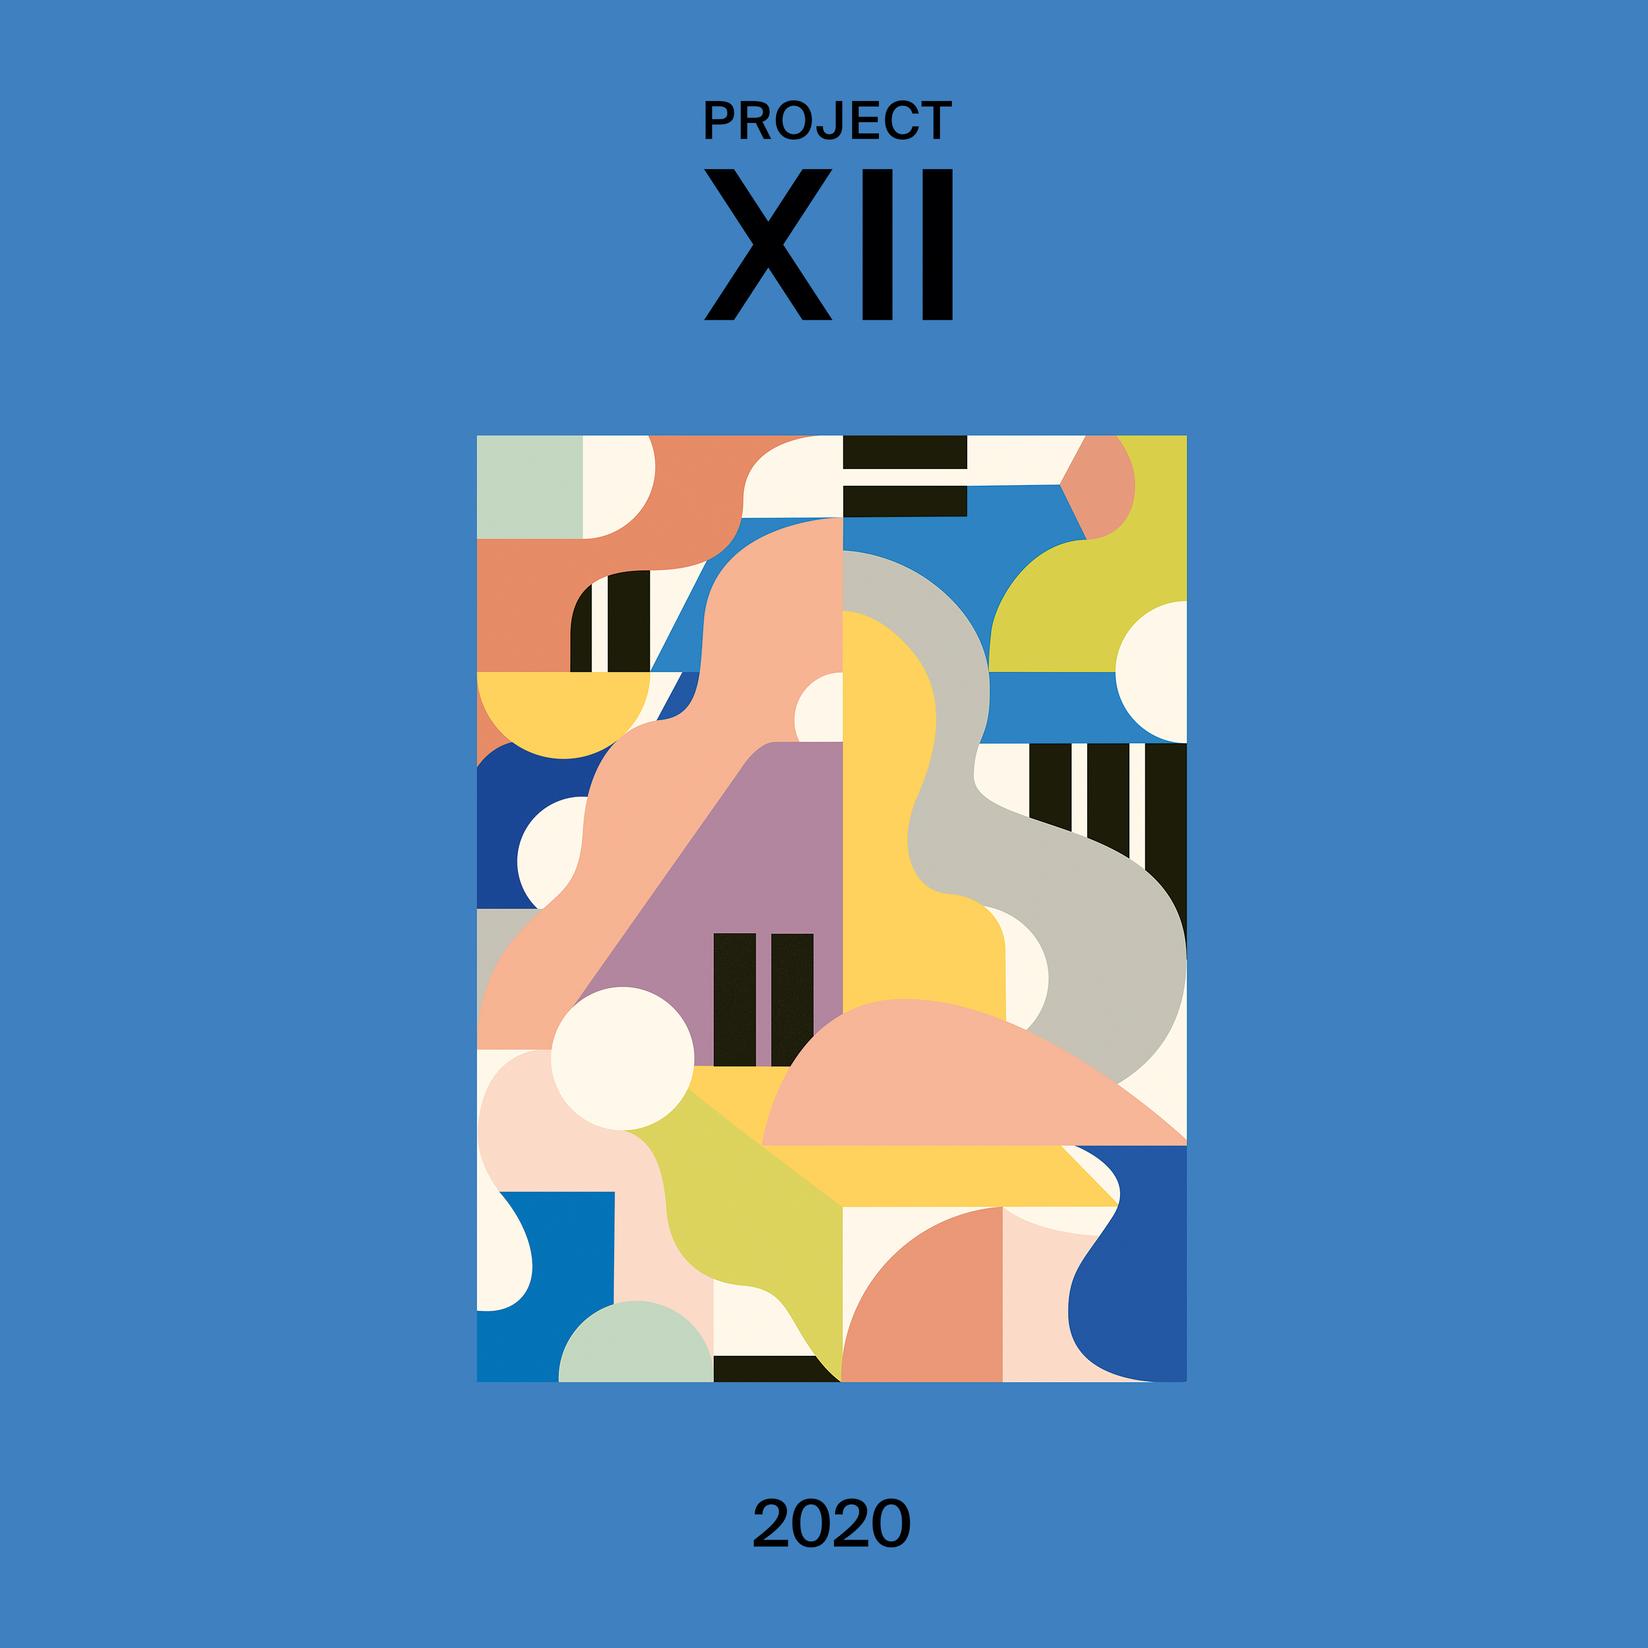 VARIOUS ARTISTS - Project XII - 2020.